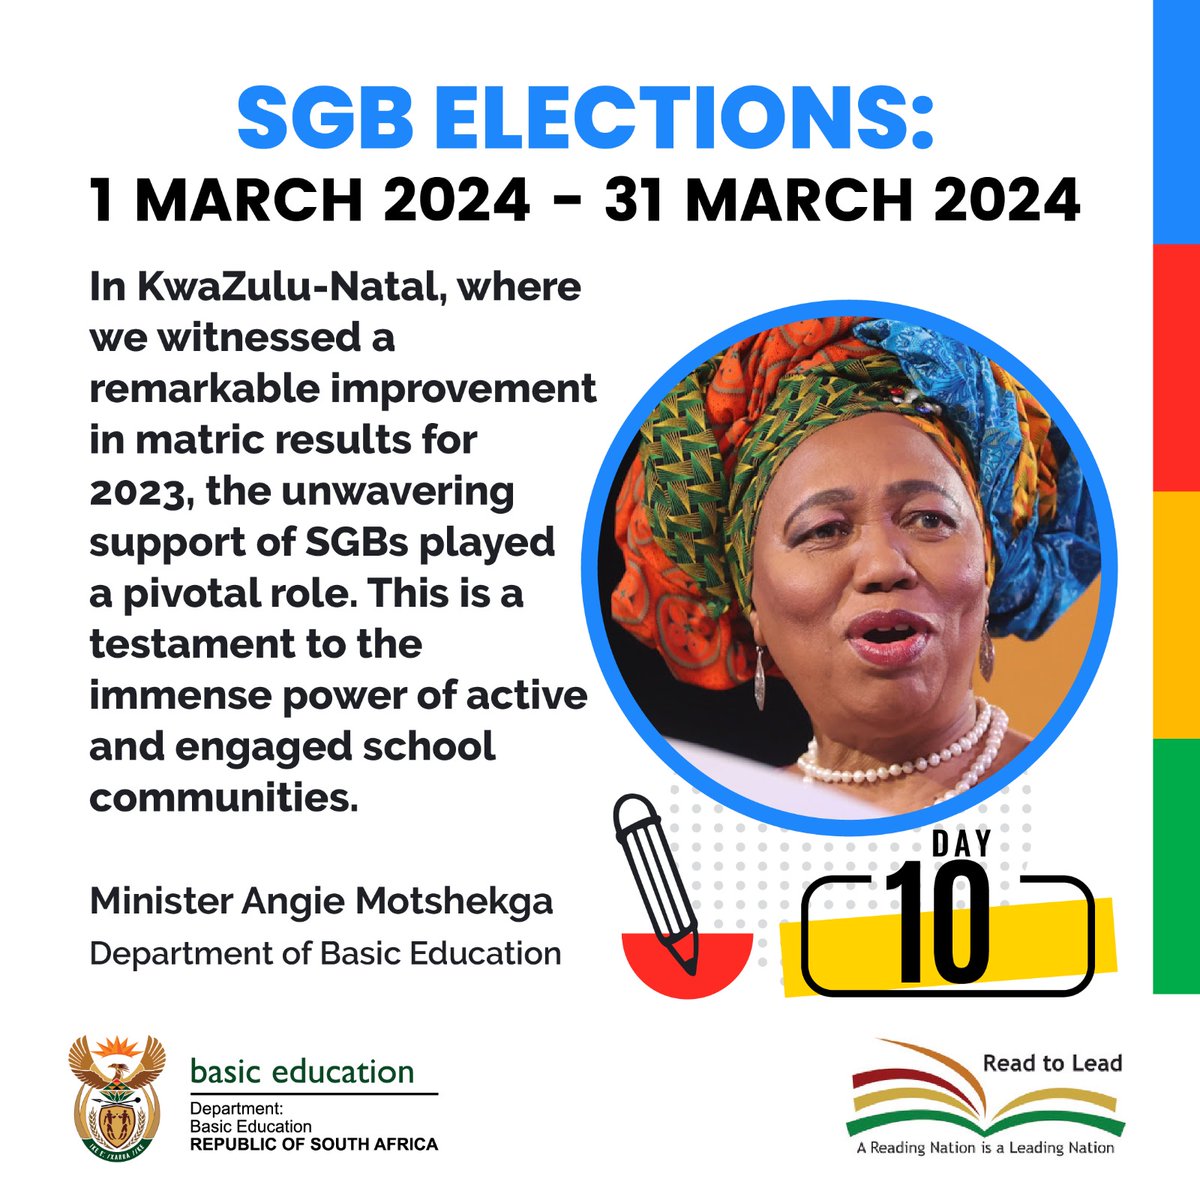 SGB ELECTIONS: School Governing Bodies play a pivotal role in a school's performance and achievements. Play your part, get involved. #LetsGo2024 #SGBelections #Vote @DBE_SA @ReginahMhaule @HubertMweli @ElijahMhlanga